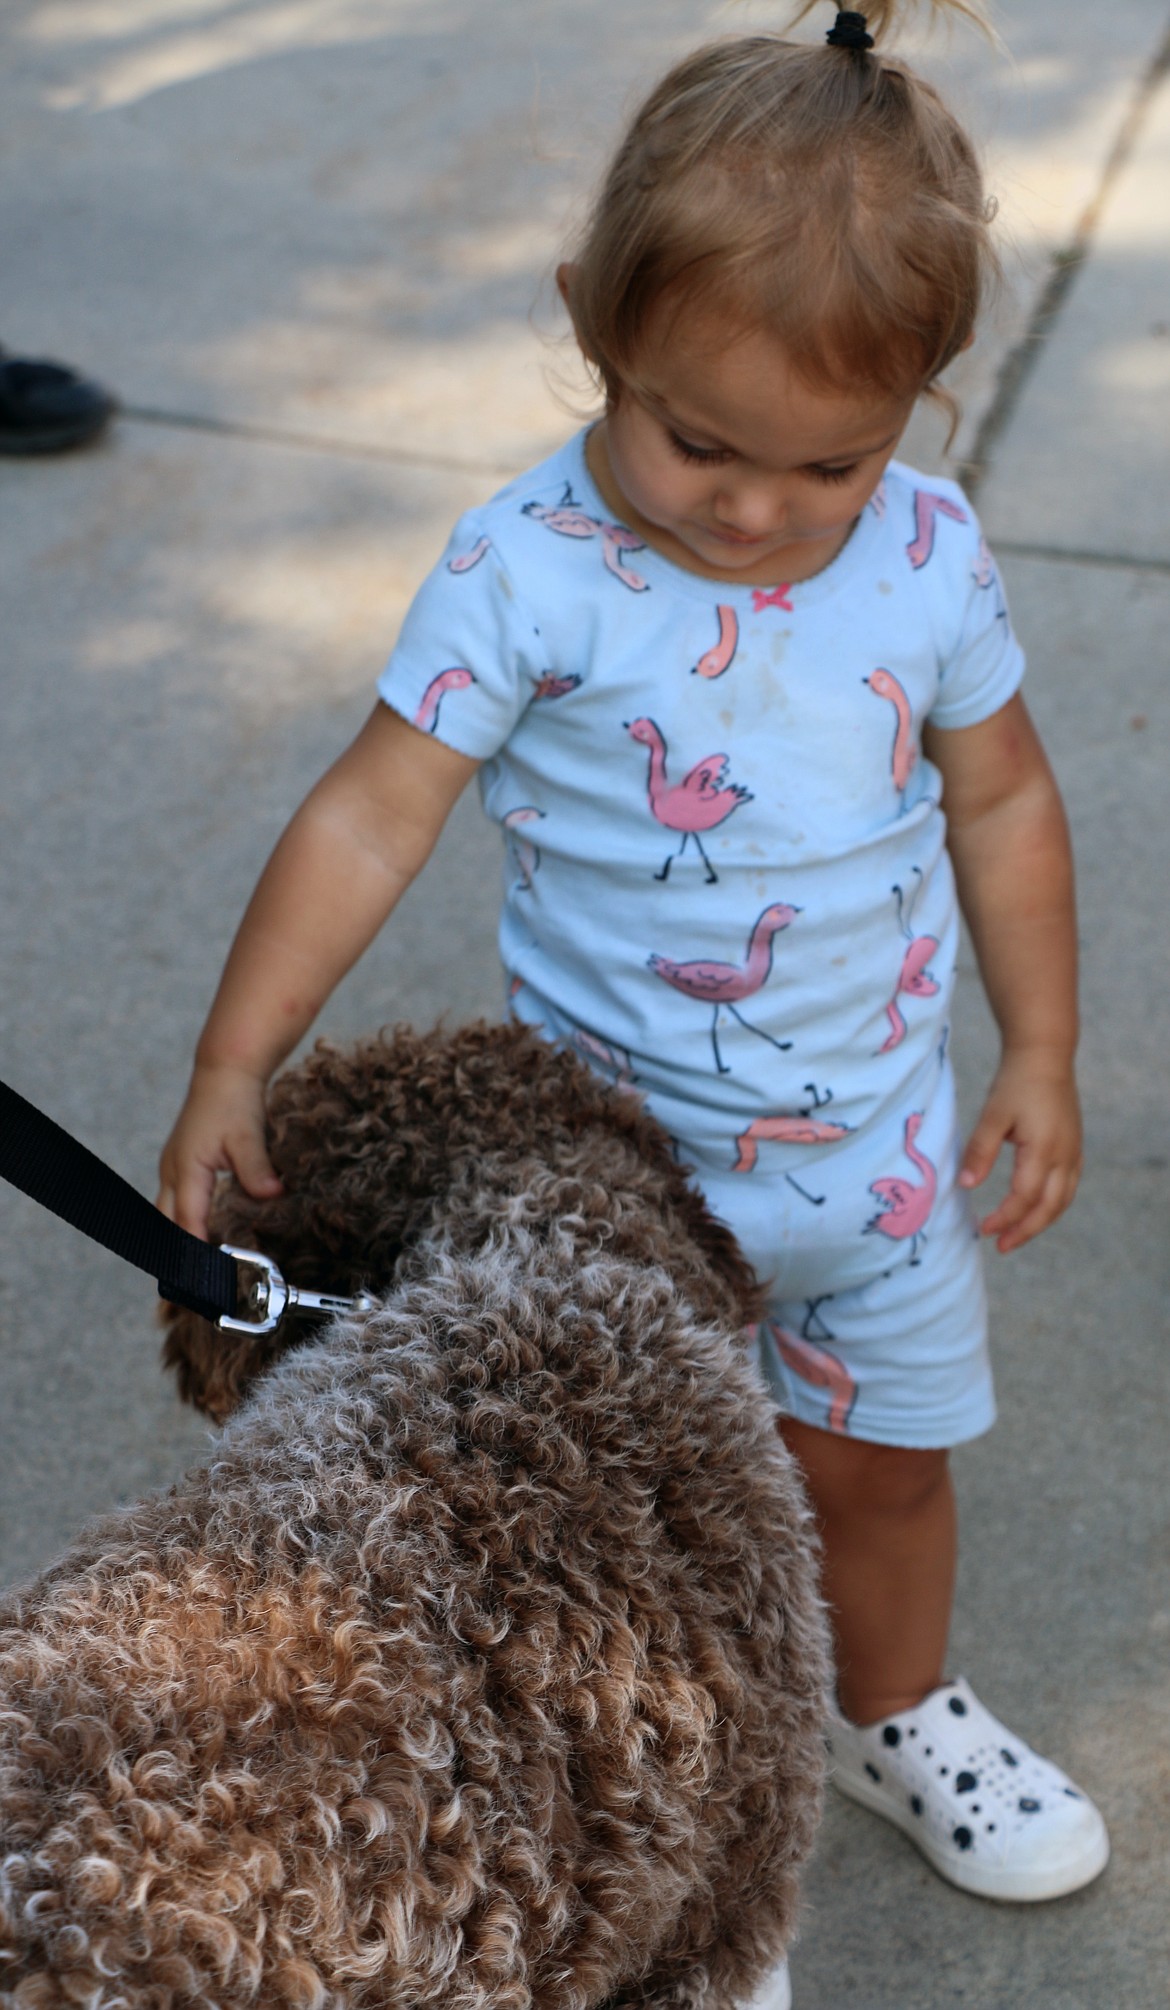 A youngster gives some gentle love to a four-legged attendee of Saturday's Arts & Crafts Fair. The weekend event was held for the 50th year in the community and featured a variety of arts, crafts and more.